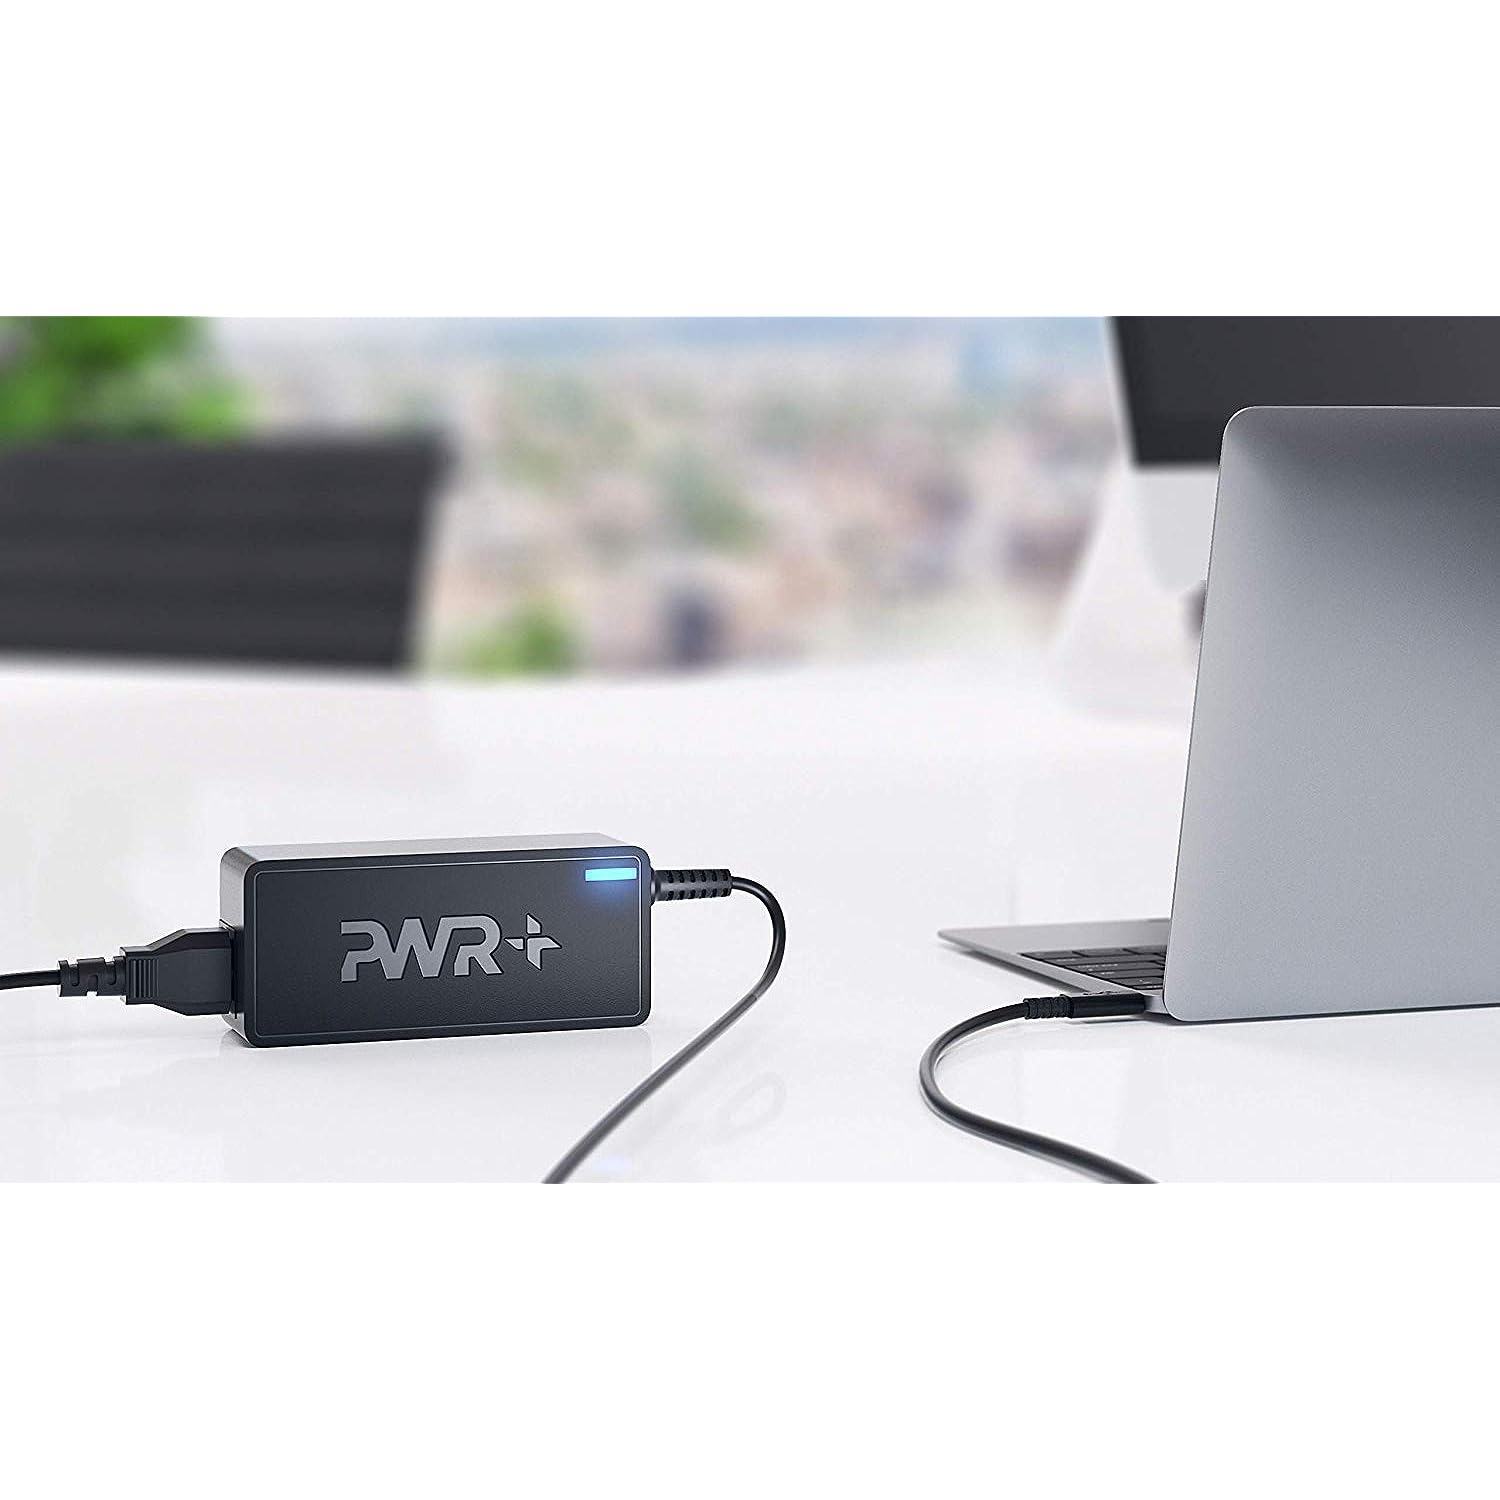 Pwr+ PWR-TAJPD-171 USB-C Laptop Charger for Chromebook Notebook: Dell XPS  13 Samsung 4+ 9 Plus Google Pixelbook Go Acer Spin Lenovo Yoga Thinkp…